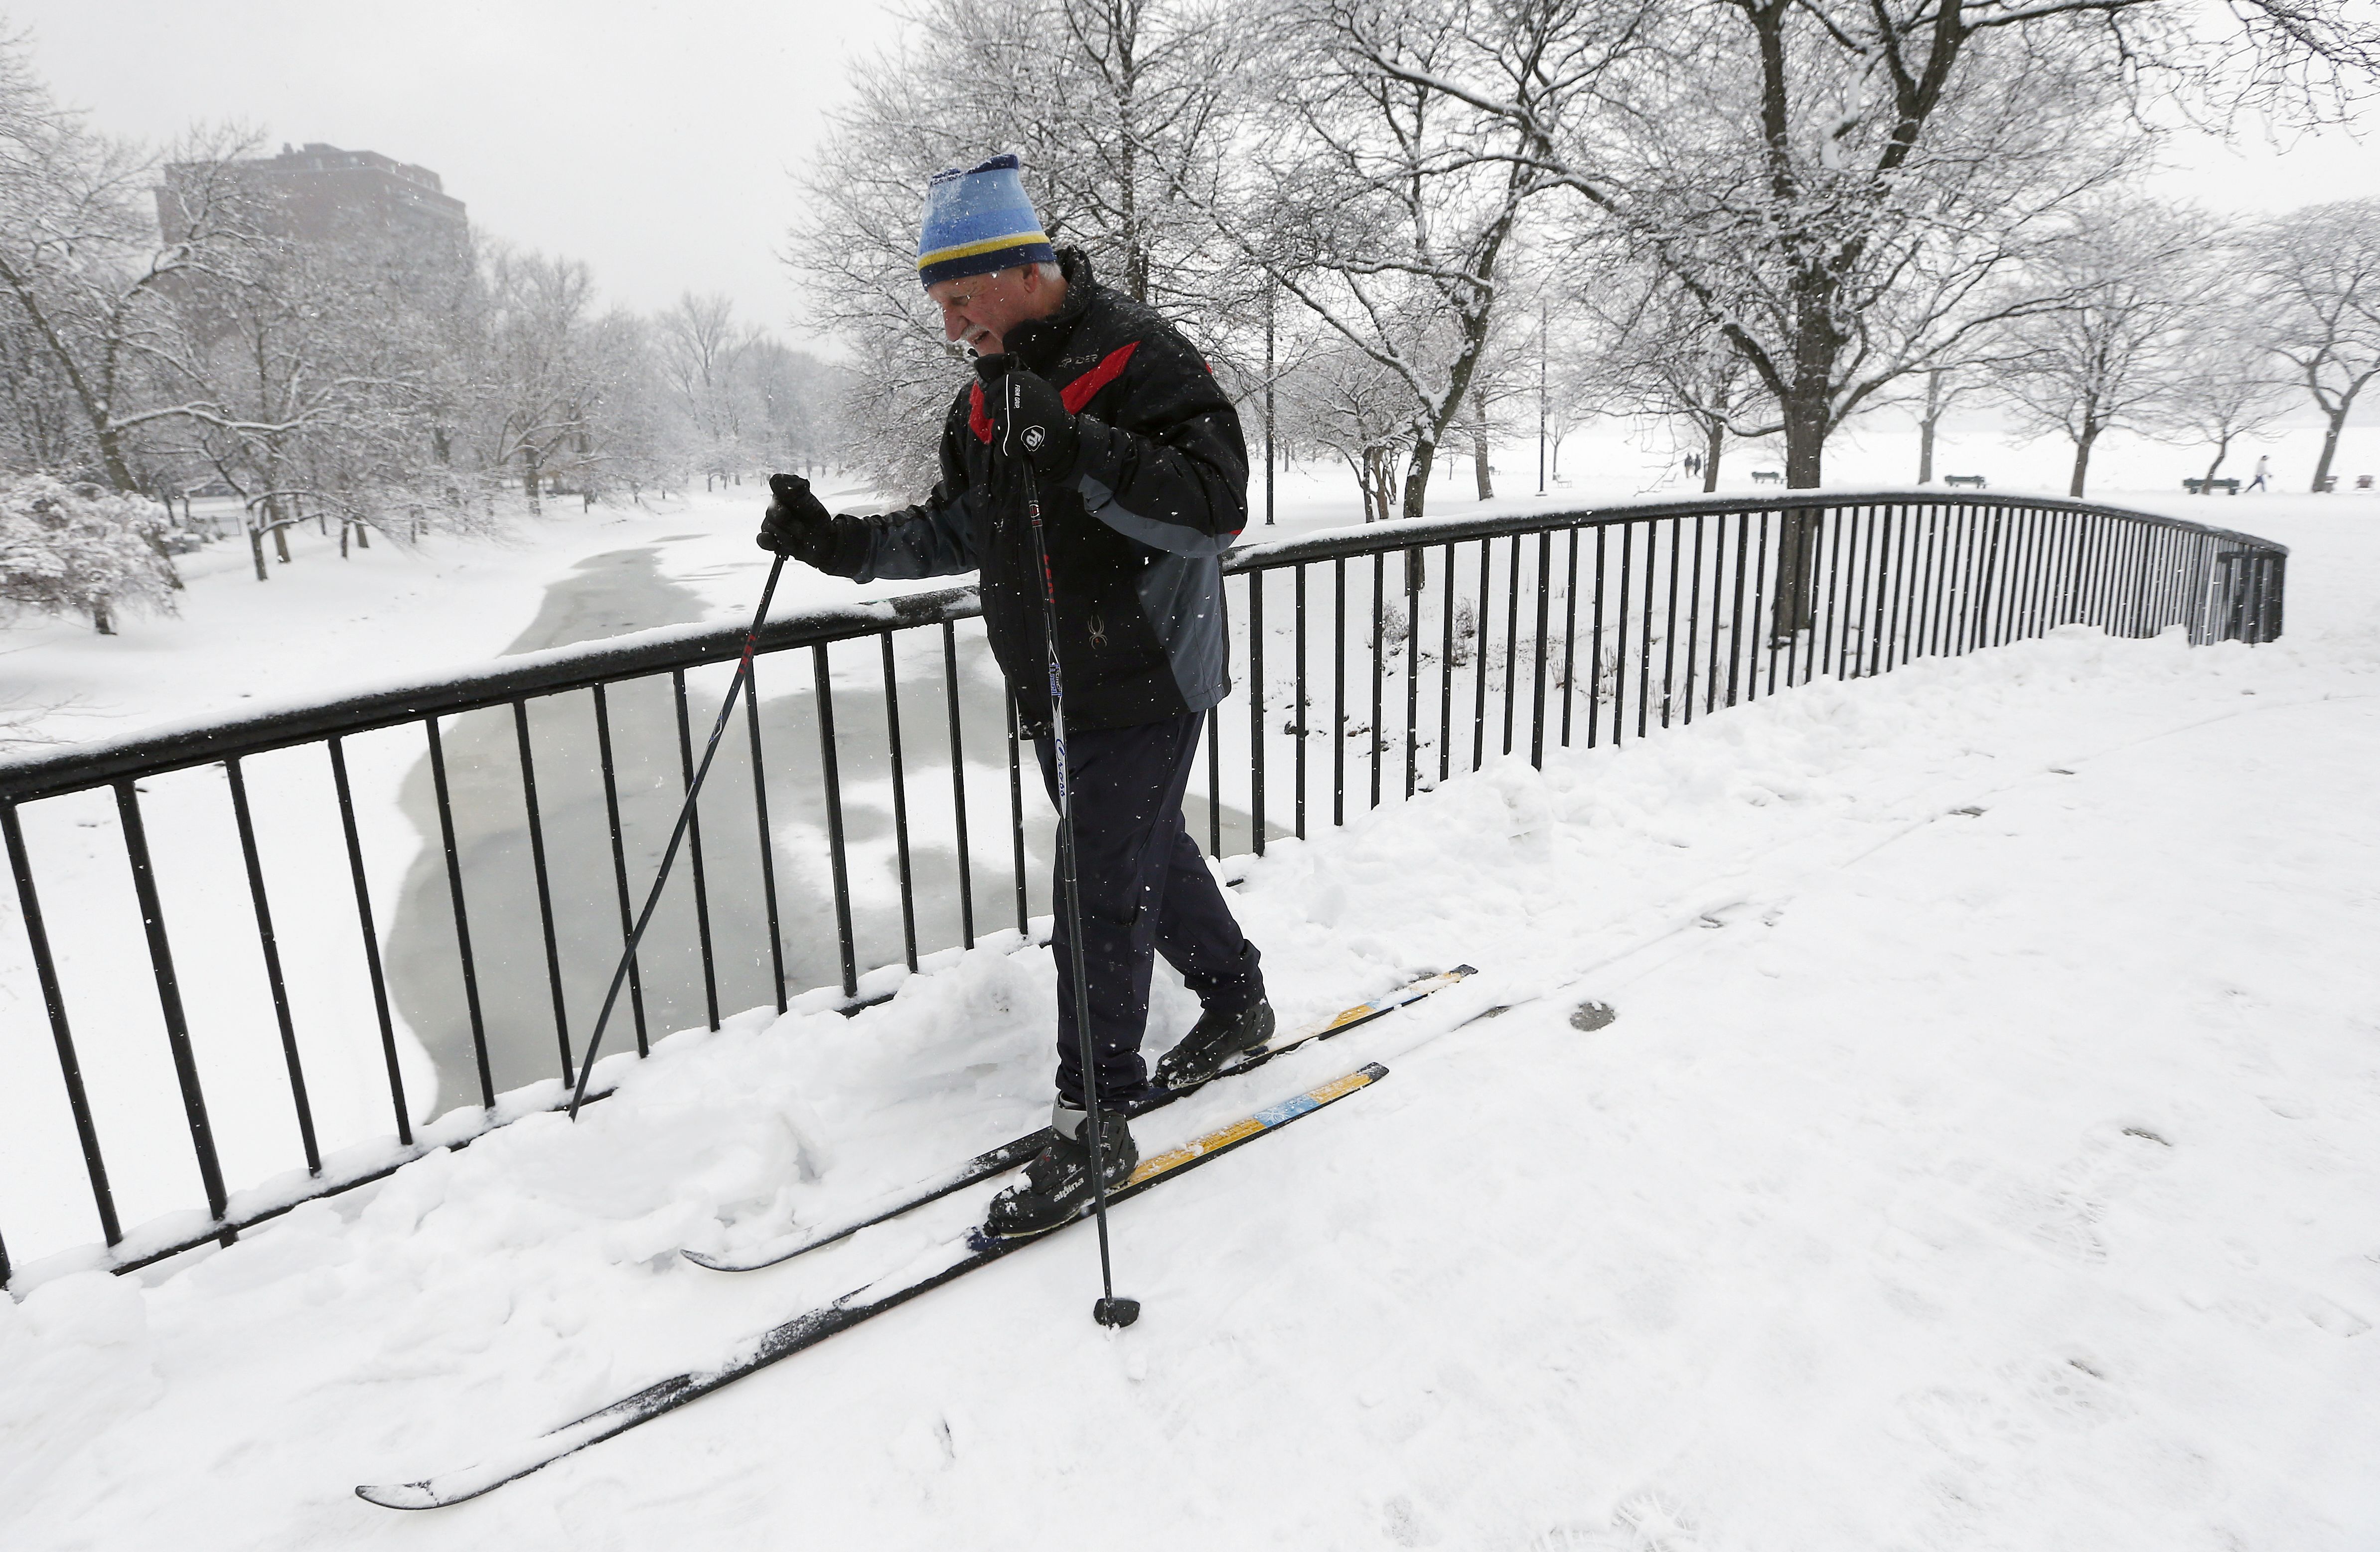 Irv Rosenberg, of Boston, uses cross country skis on the Esplanade in Boston, Saturday, Jan. 24, 2015. A winter storm warning covering Boston and Hartford, Connecticut was in effect through 7 p.m. as the National Weather Service said to expect 4 to 8 inches of wet snow to fall by the time the storm moves out. (AP Photo/Michael Dwyer)